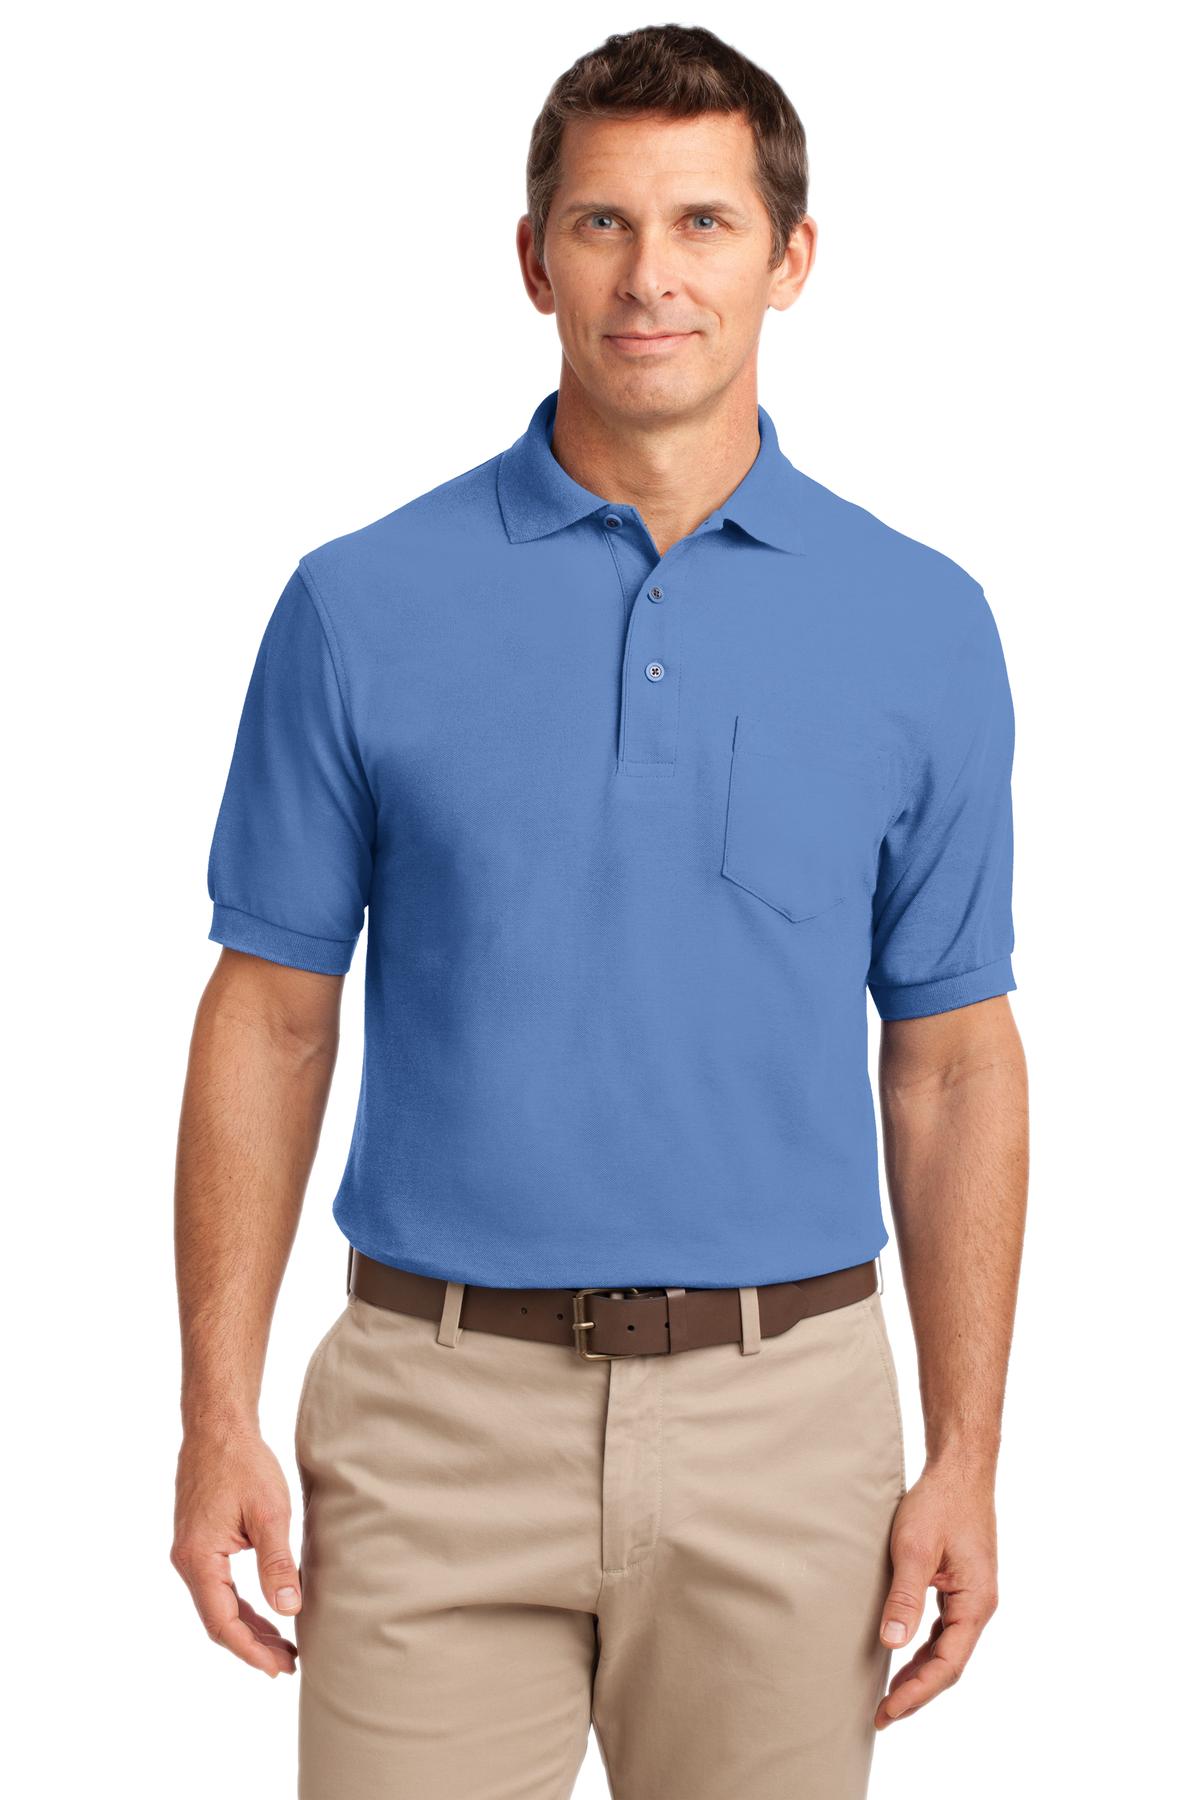 Port Authority Silk Touch Polo with Pocket.  K500P